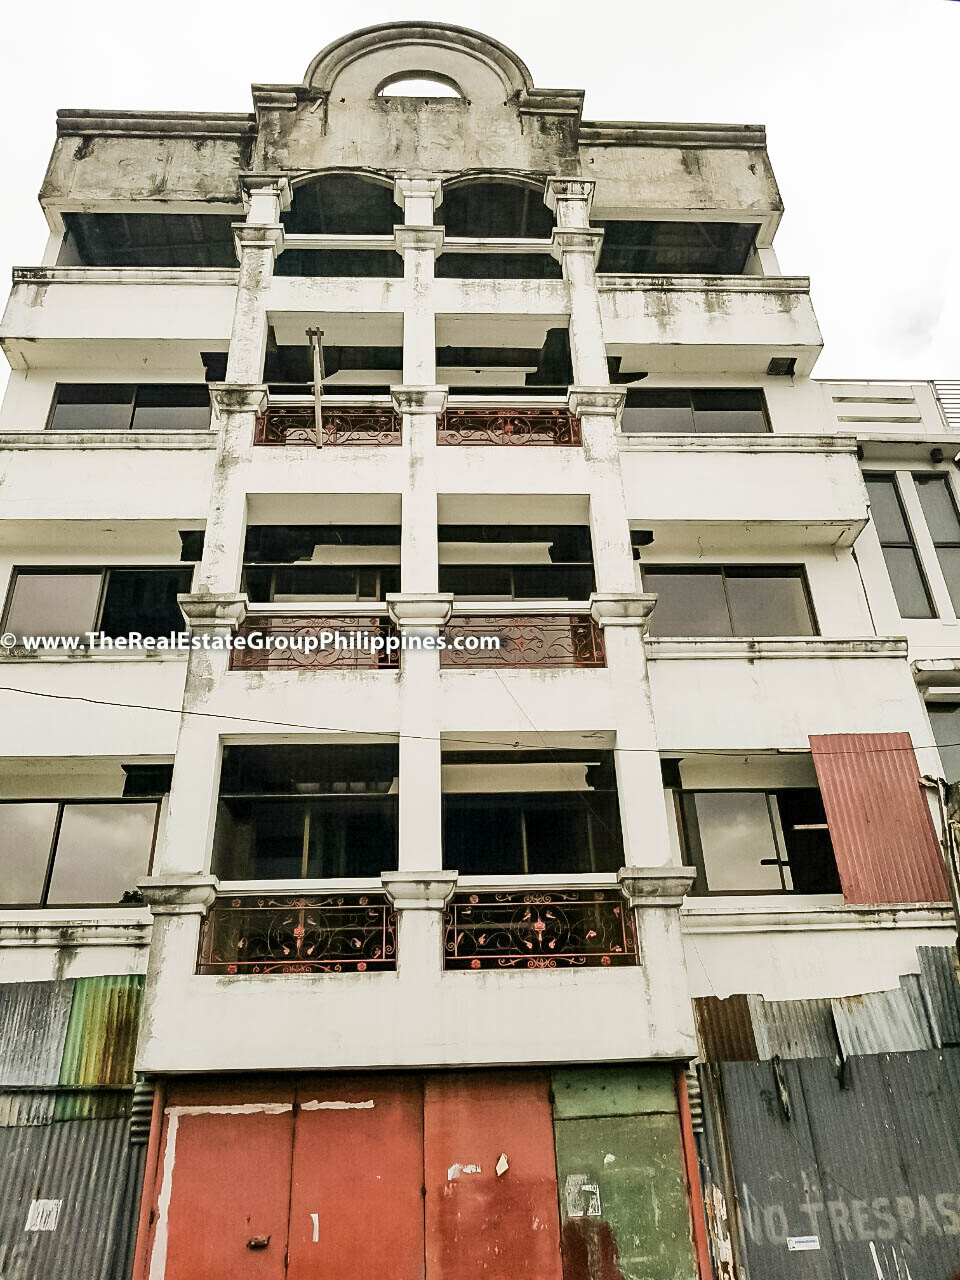 1,260 Sqm, 5-Storey Residential Building For Sale, Makati City Facade